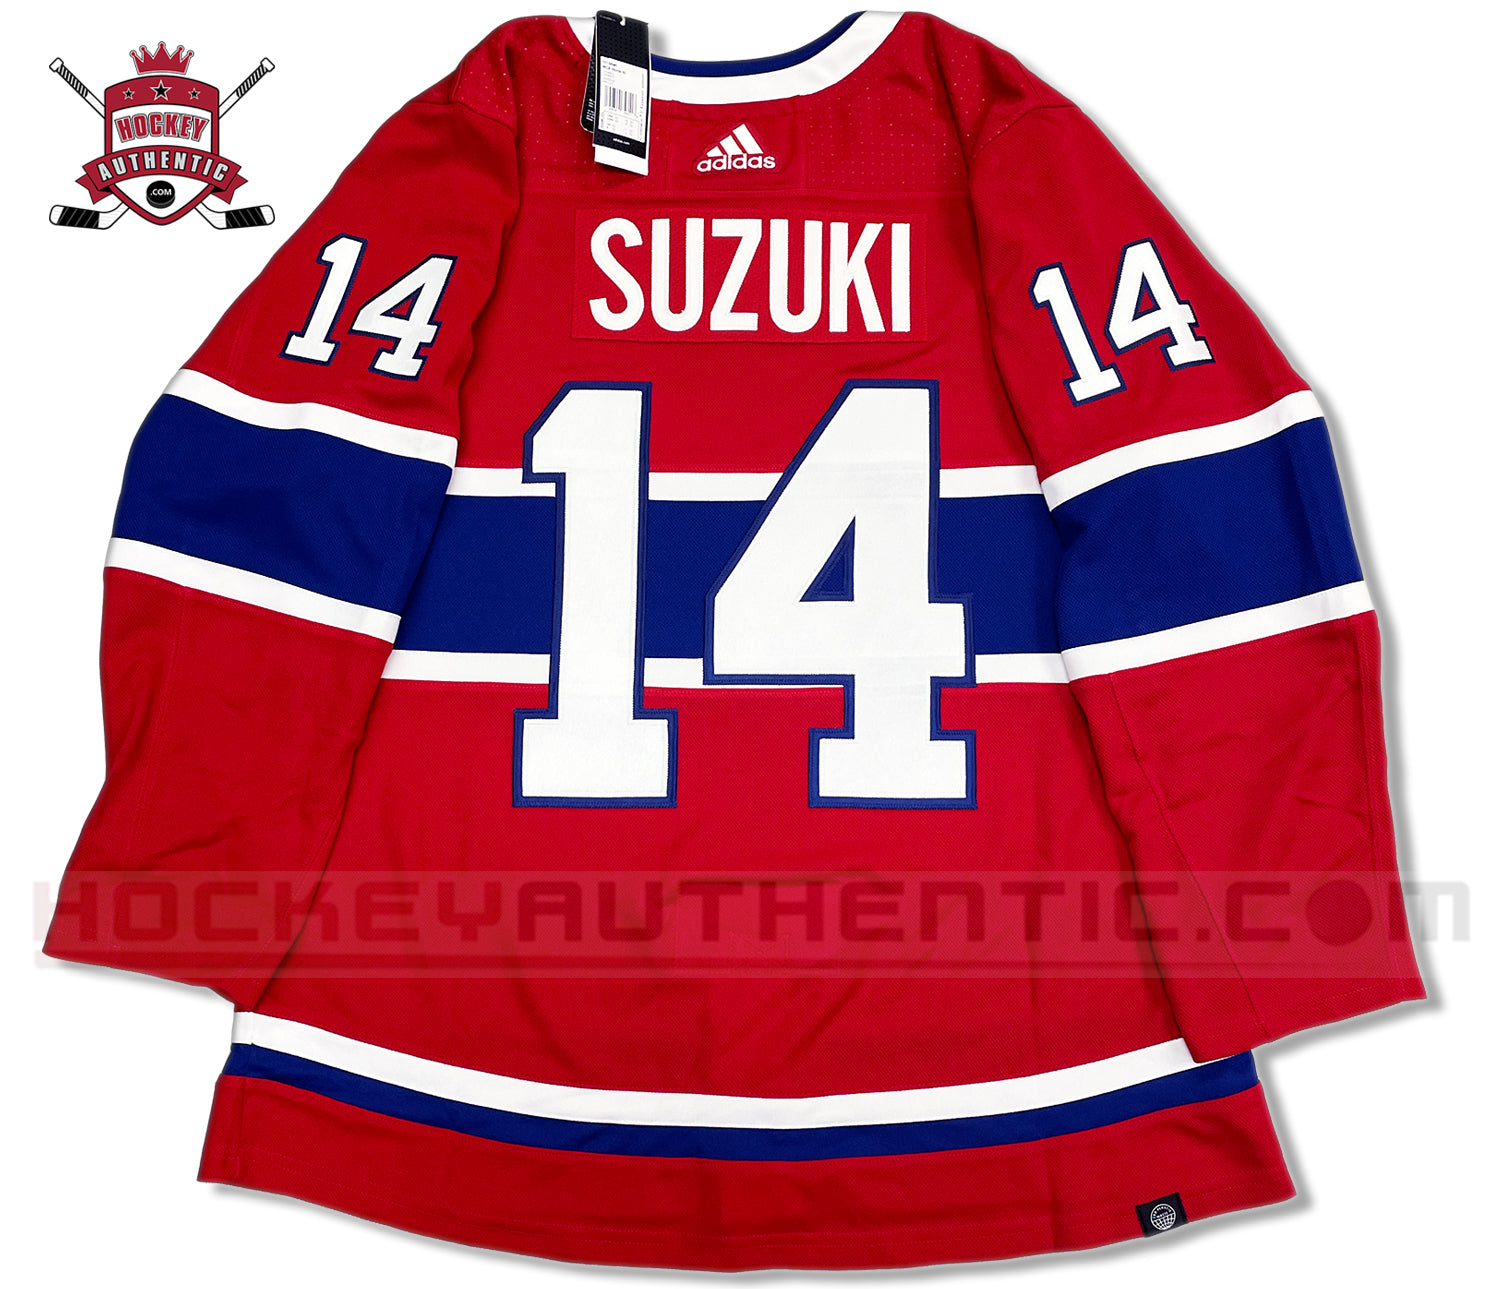 ANY NAME AND NUMBER MONTREAL CANADIENS HOME OR AWAY AUTHENTIC ADIDAS N –  Hockey Authentic